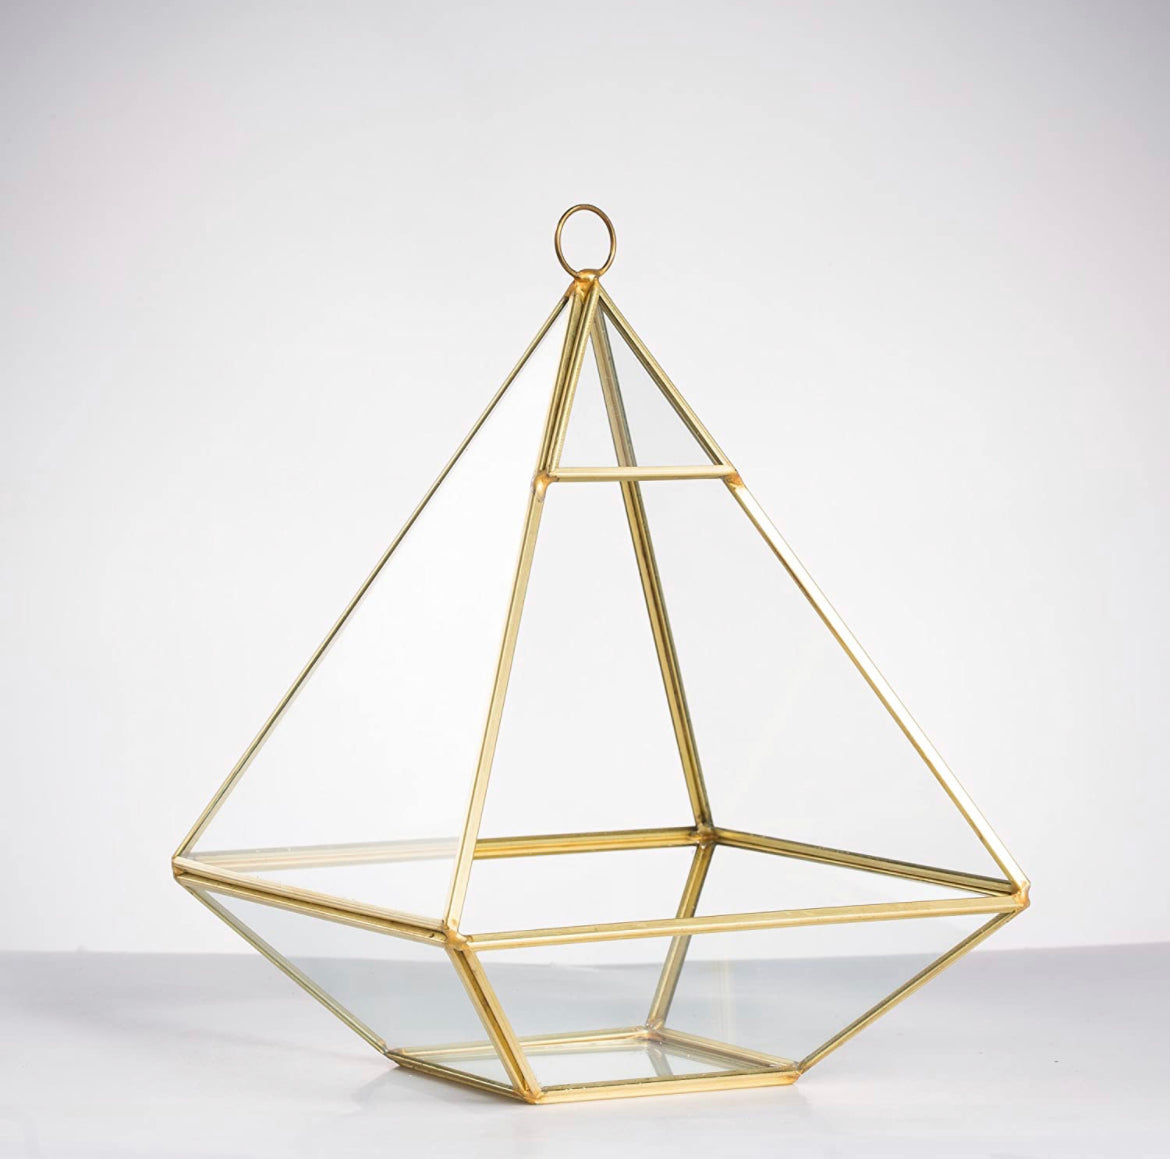 Metal and Glass Pyramid Hanging Airplant Holder